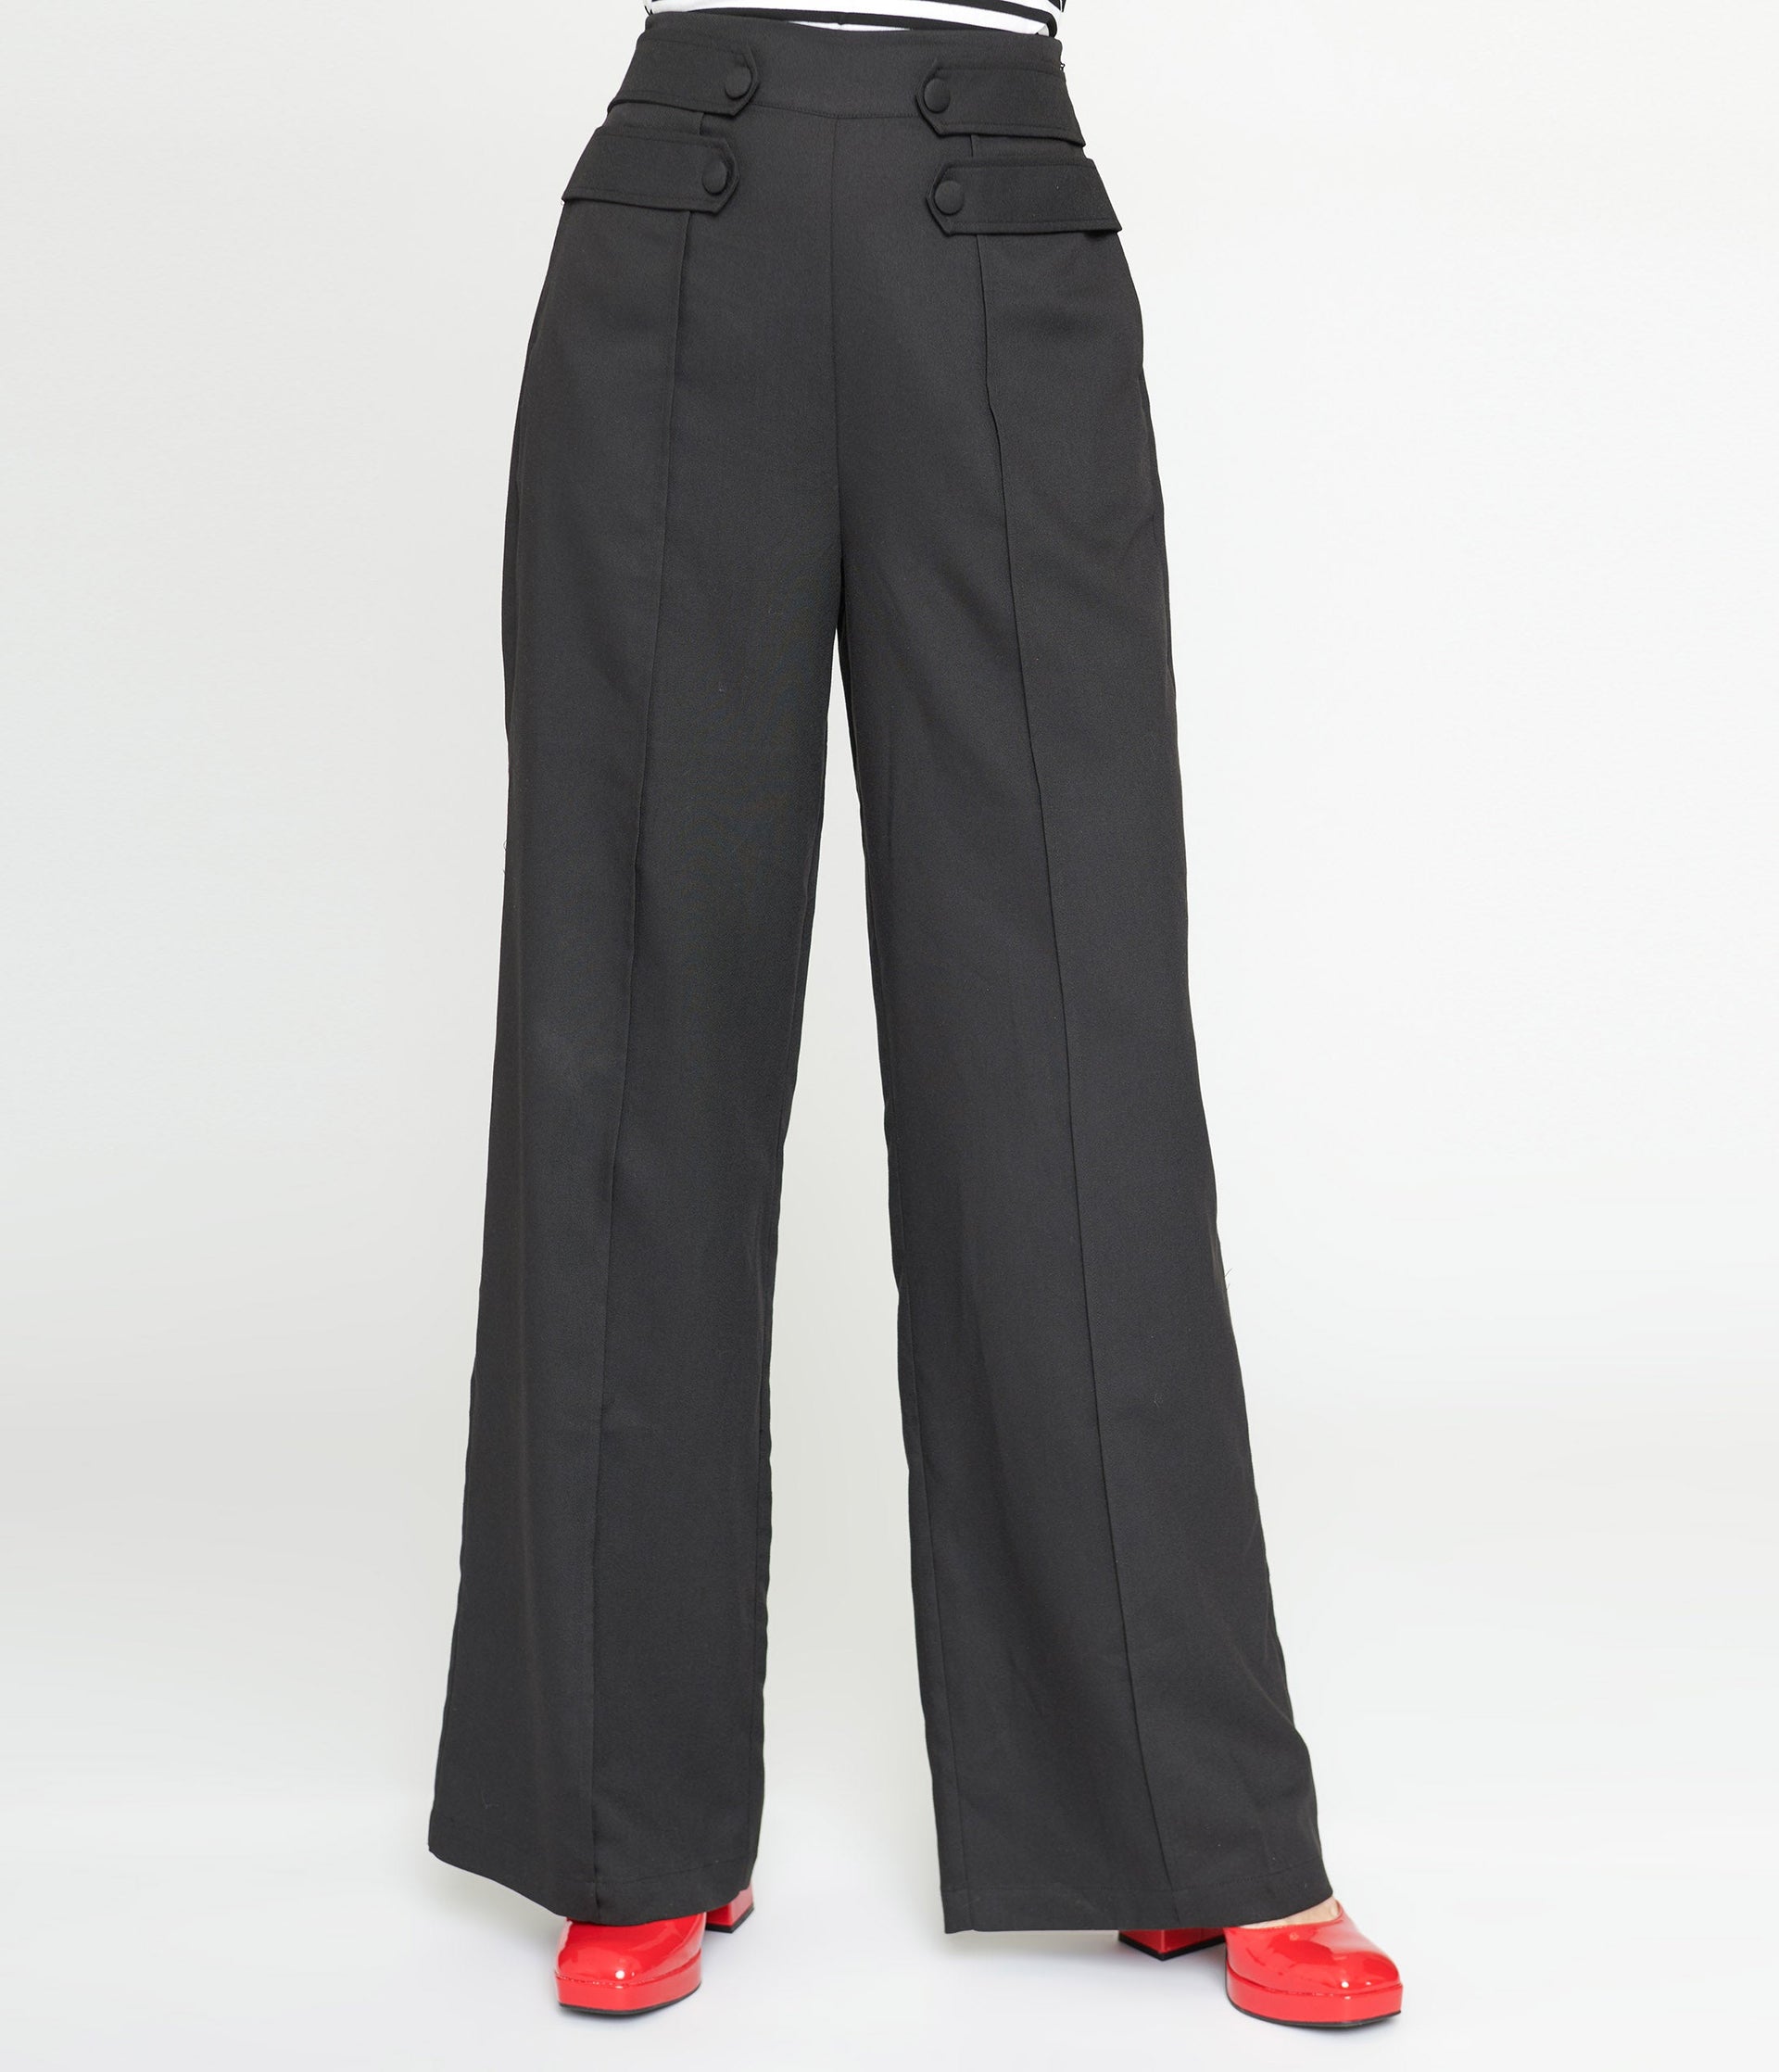 Vintage black trousers High waisted ladies pleated trousers black - wi –  Pretty Vintage Boutique